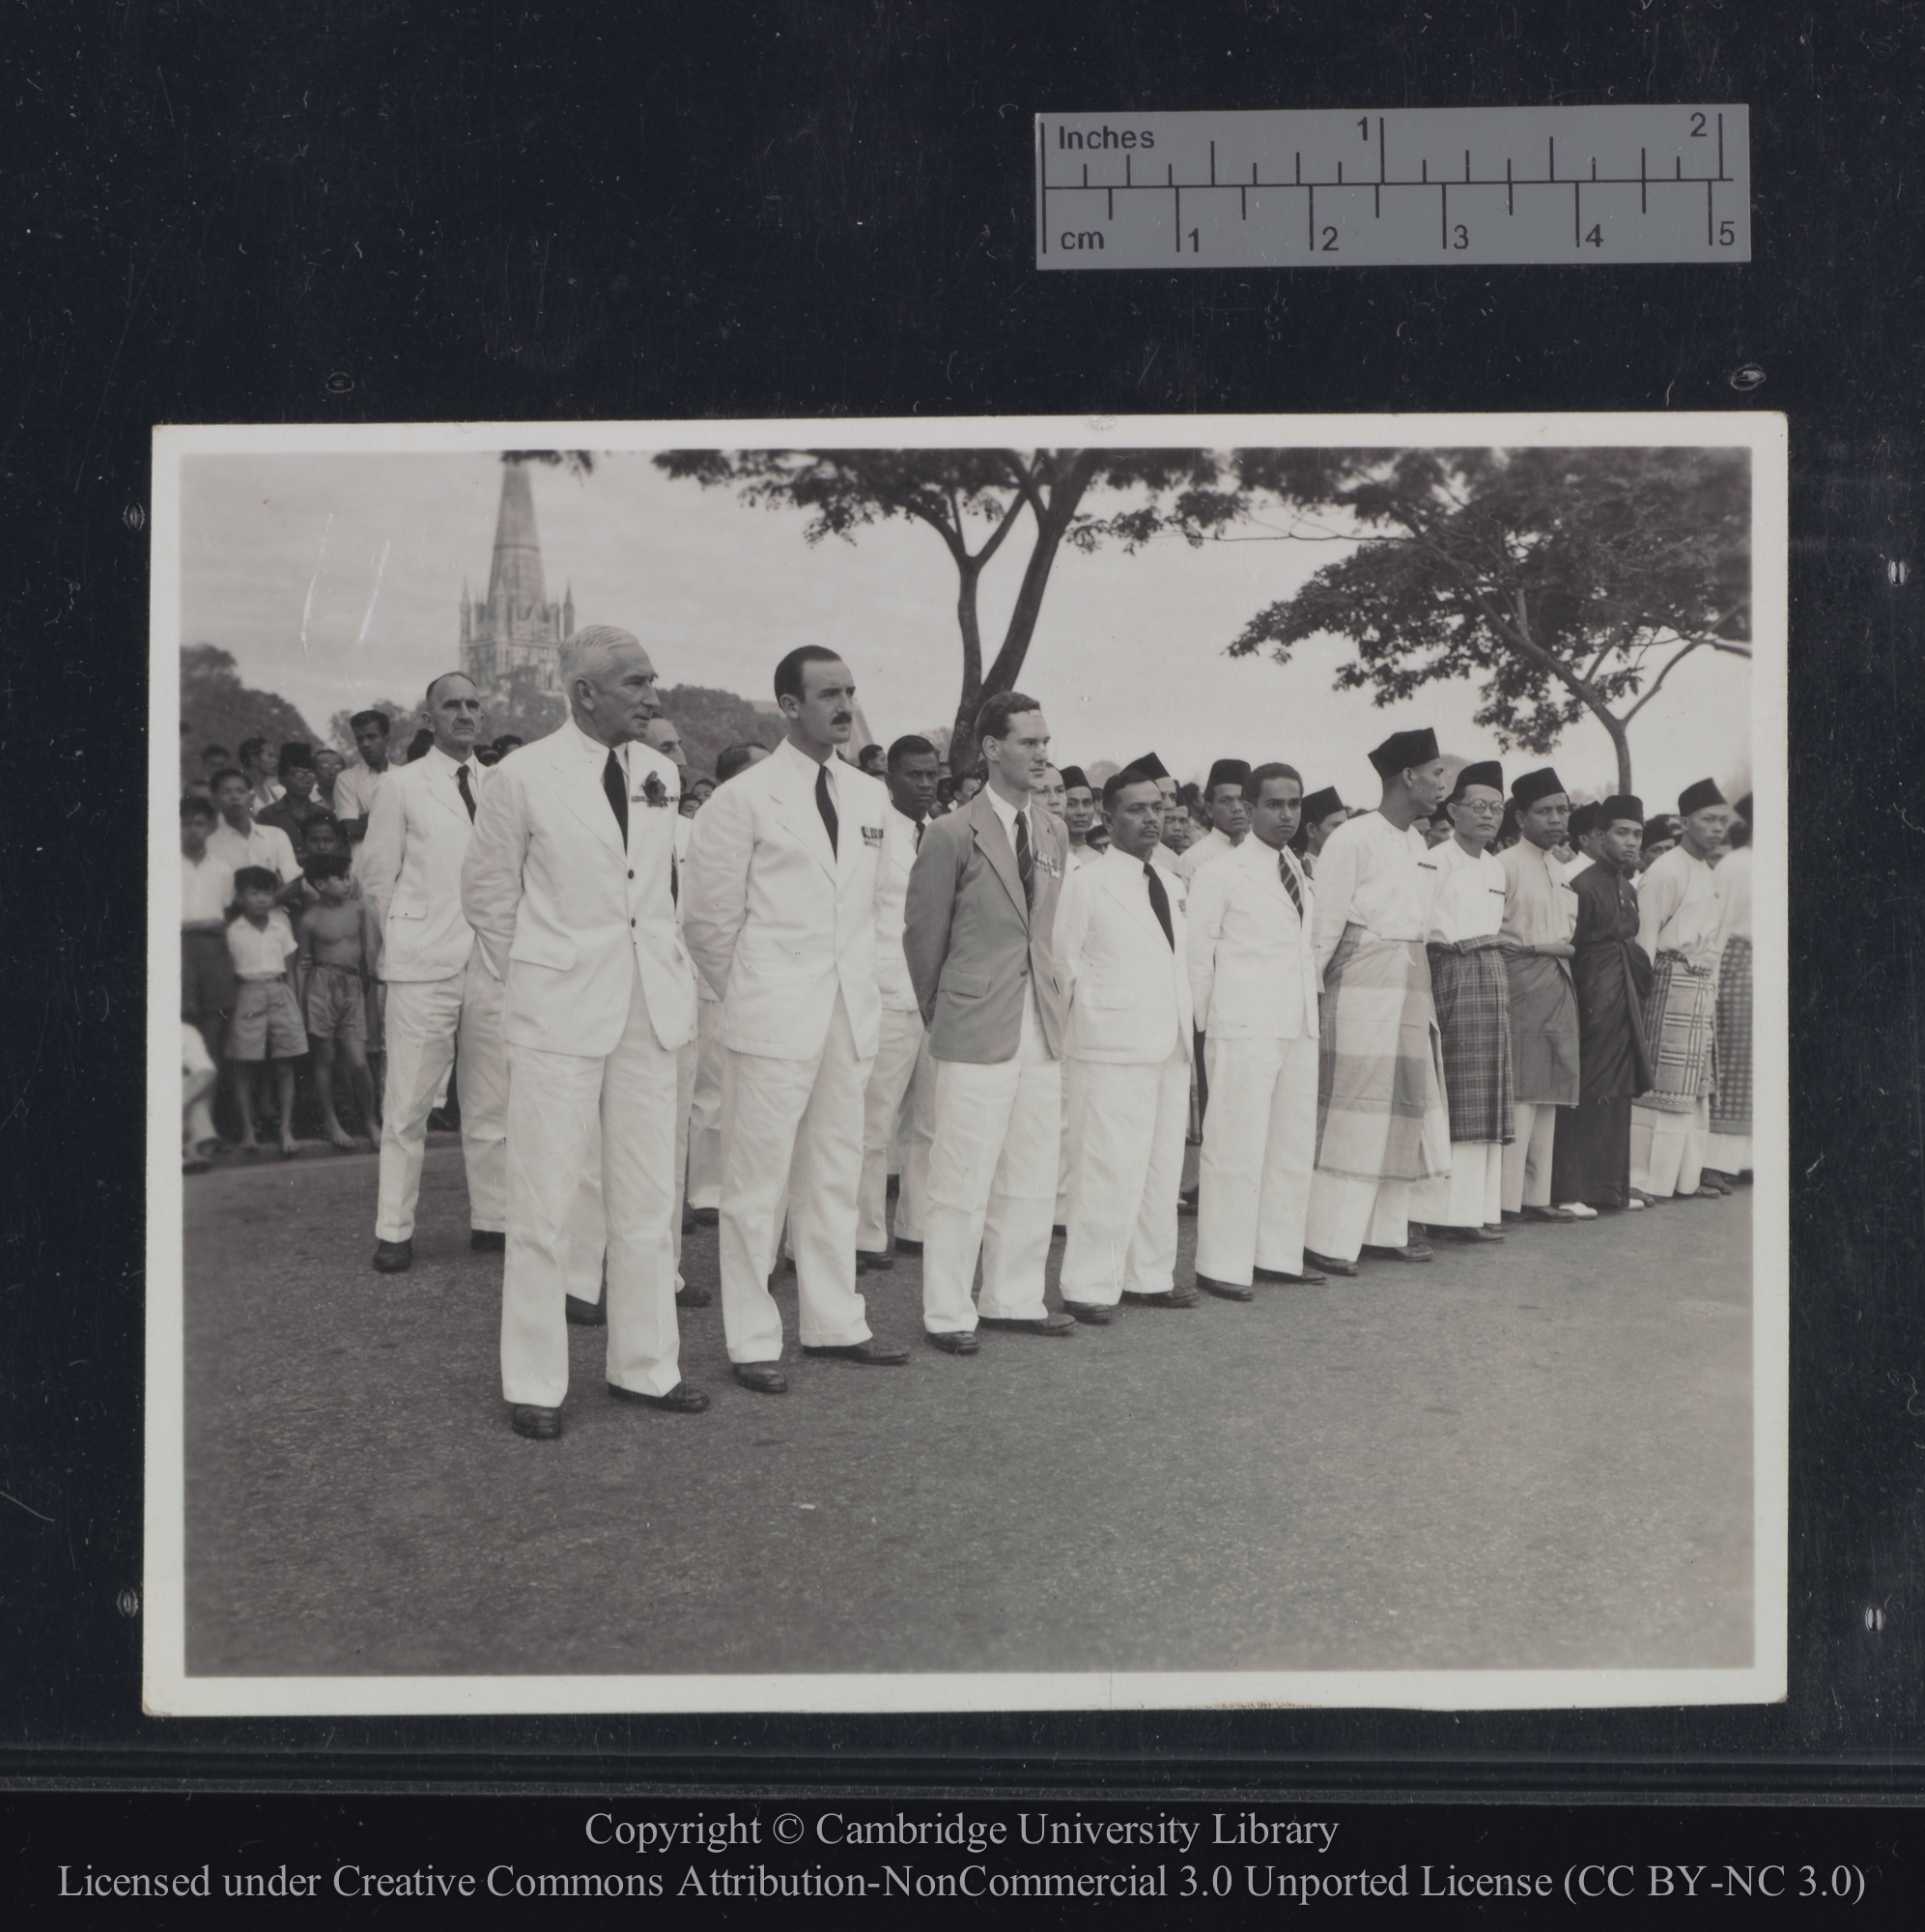 Parade of ex-Servicemen, Singapore, Armistice Day 1949, illustrating the multi-racial composition of ex-soldiers, 1949